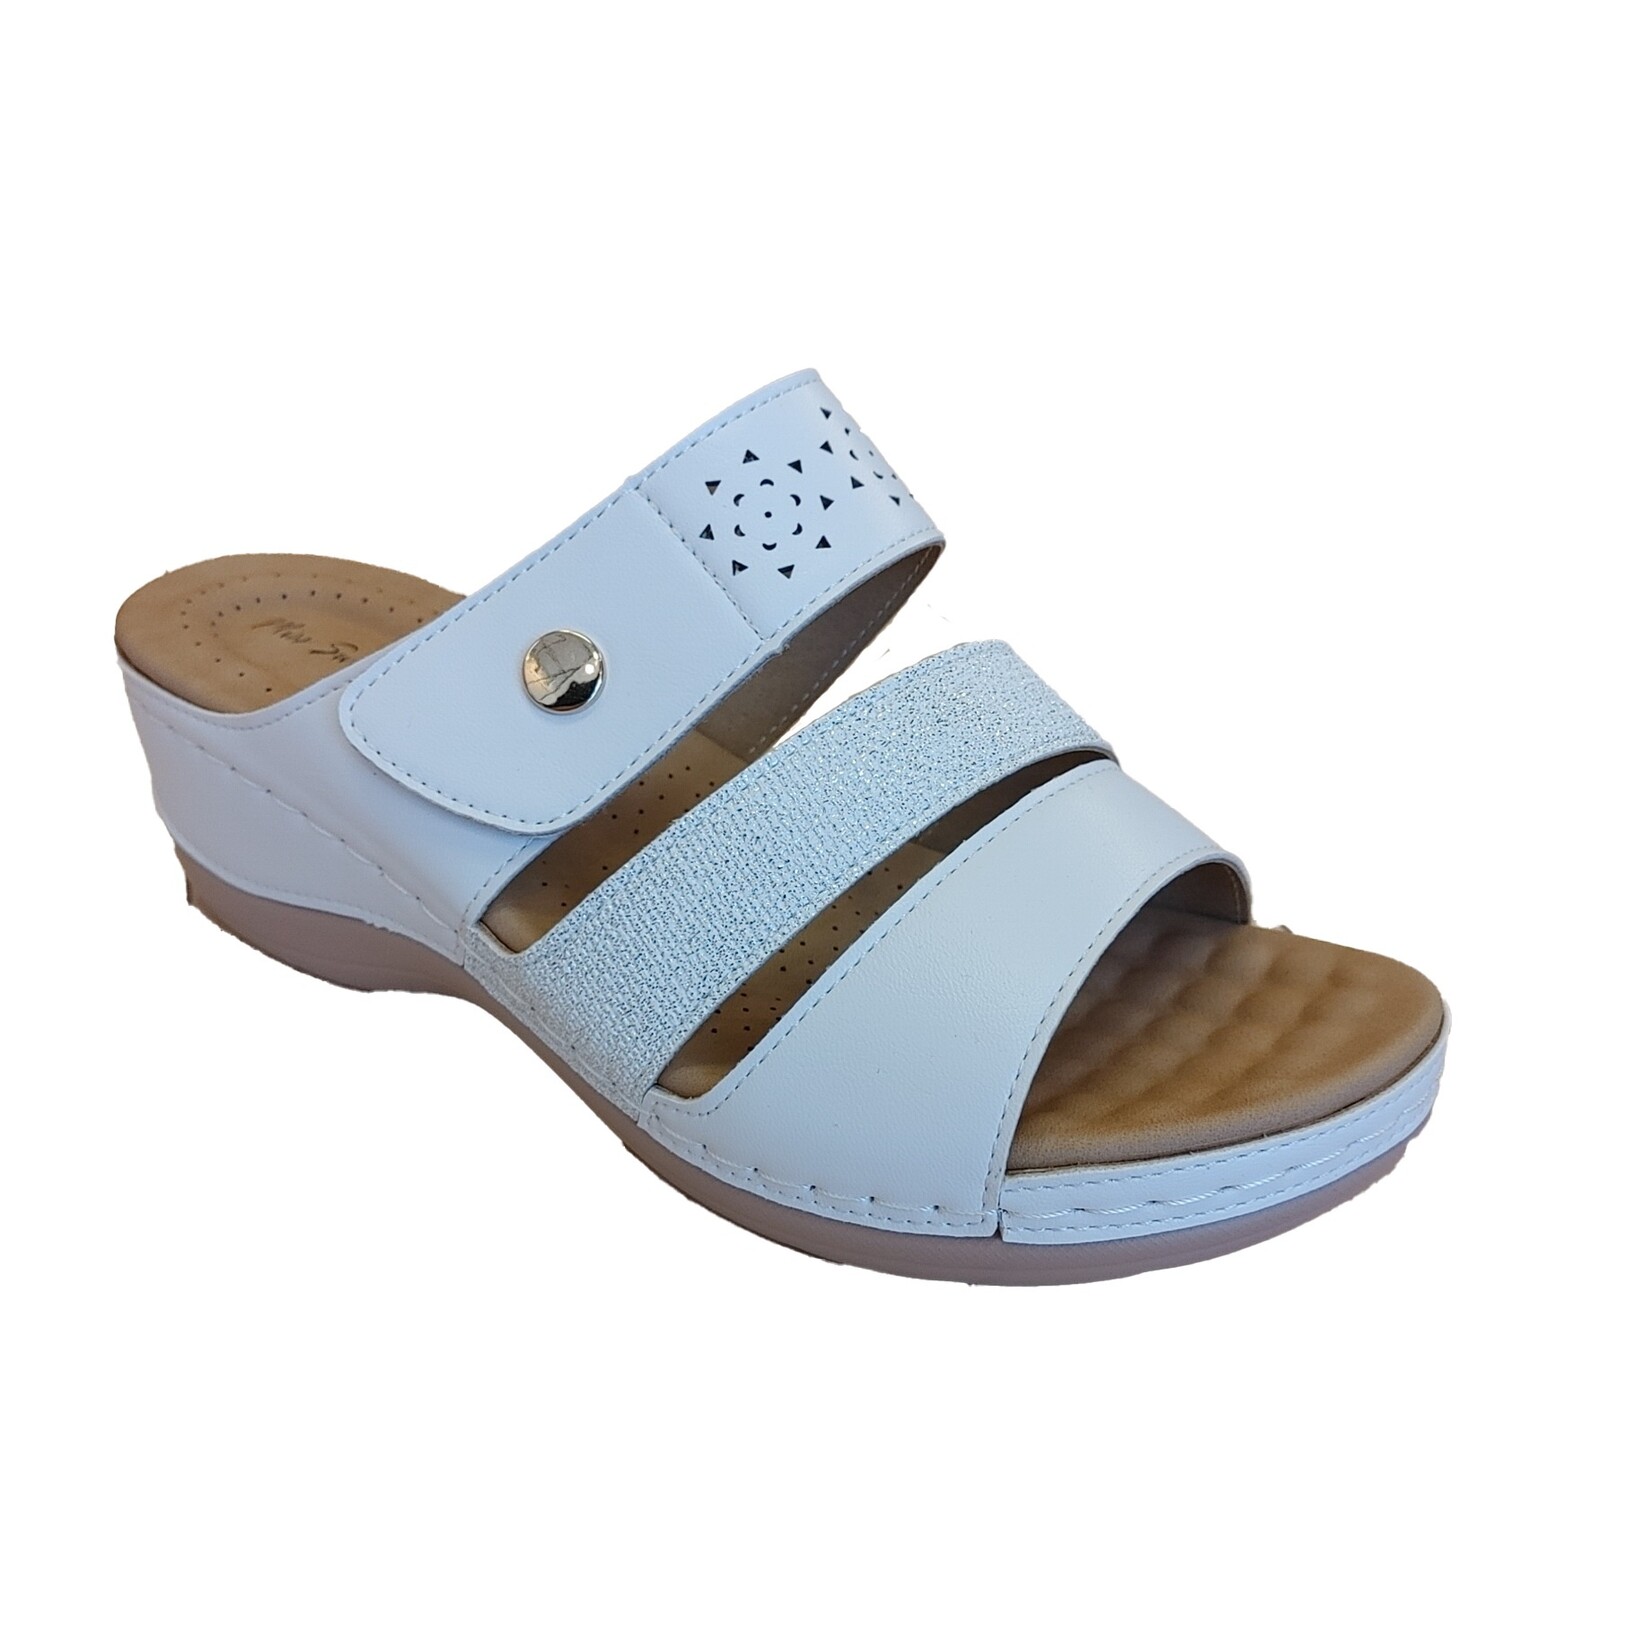 Miss Sweet Lady Sweet ladies wedge open toe sandal with velcro adjustment,sandals